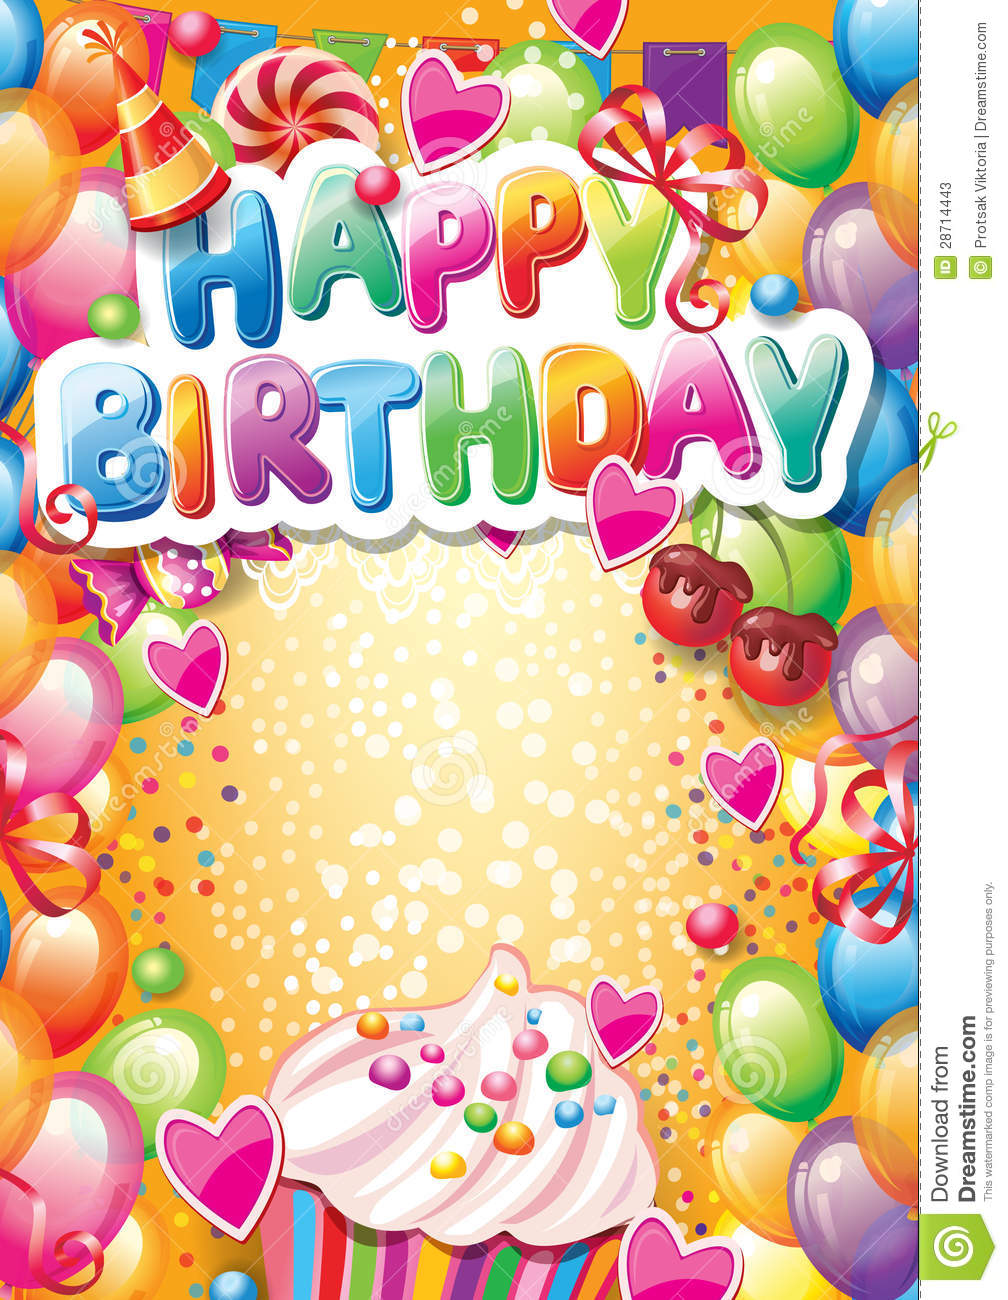 14-happy-birthday-card-template-publisher-images-happy-birthday-card